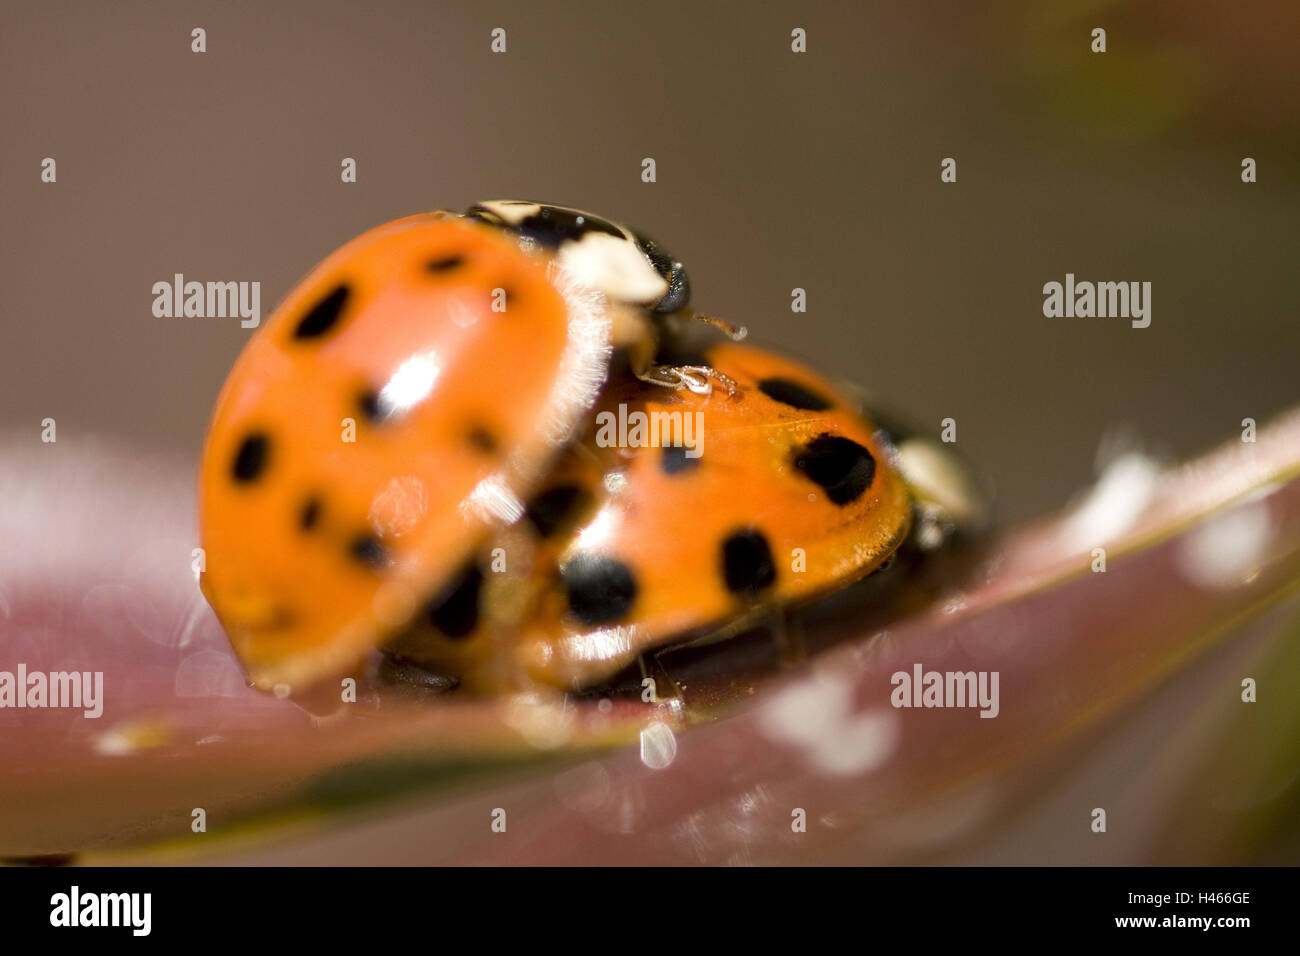 Ladybird, Coccinellidae, mating, beetle, insects, Polyphaga, reproduction, coition, nature, mating behaviour, Stock Photo